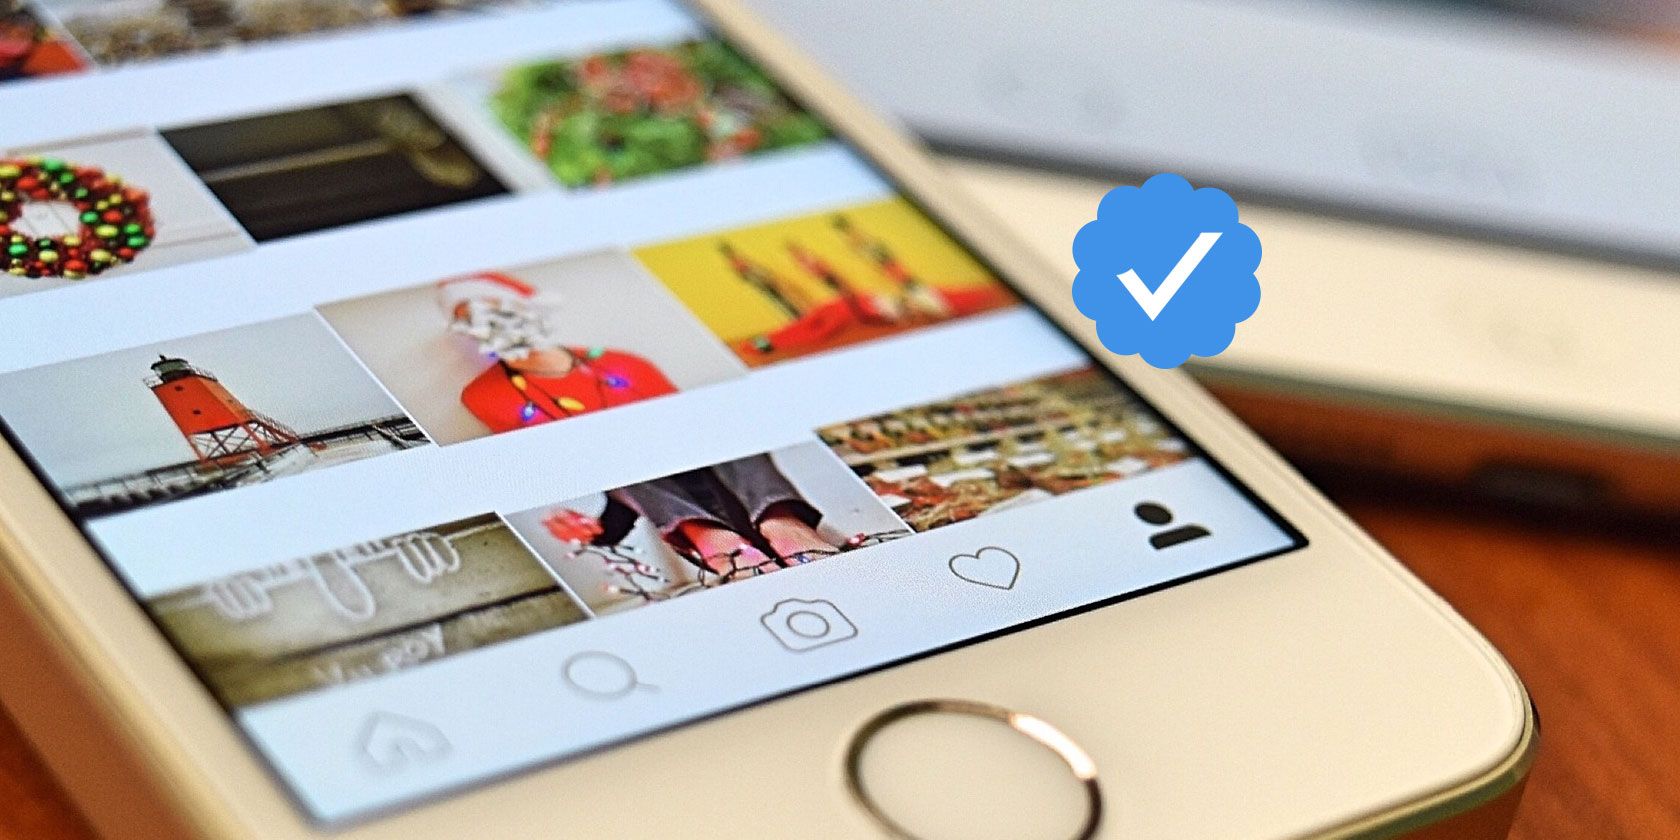 iPhone showing the Instagram app with a Verified check superimposed 